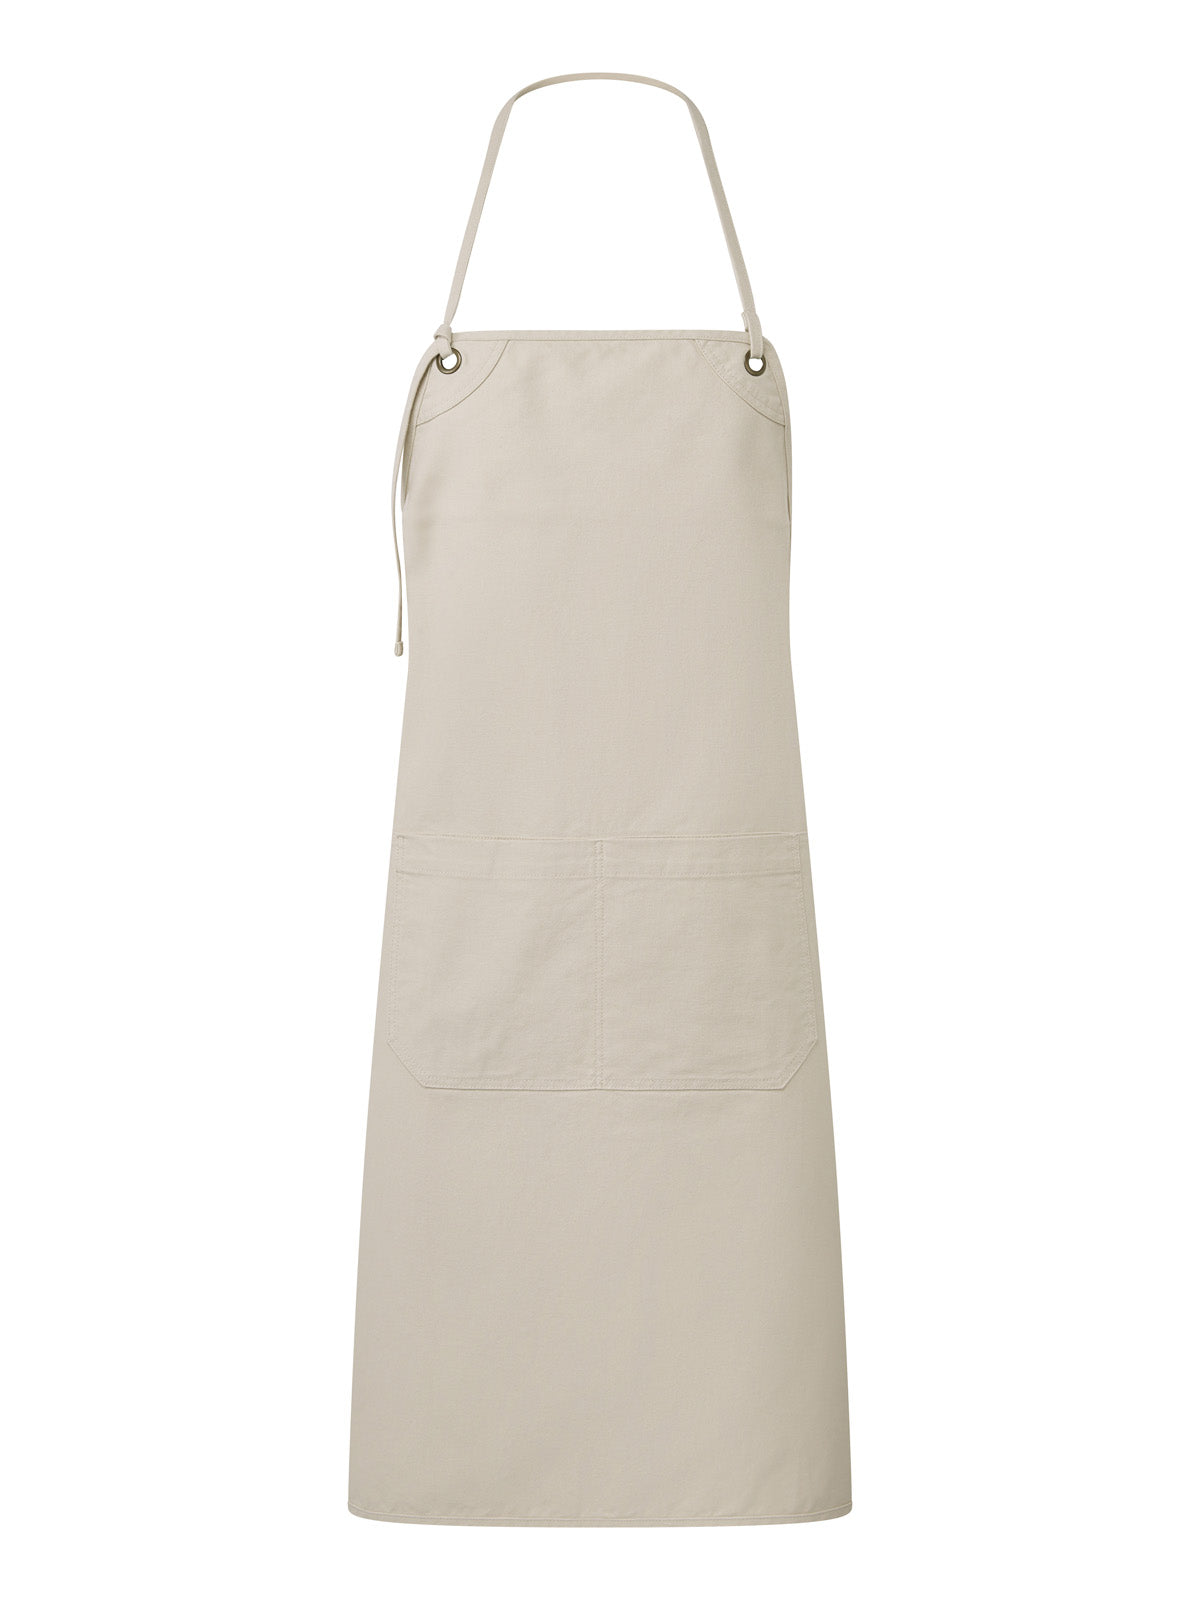 ‘Artisan’s Choice’ Double Pocket Canvas Apron in Natural